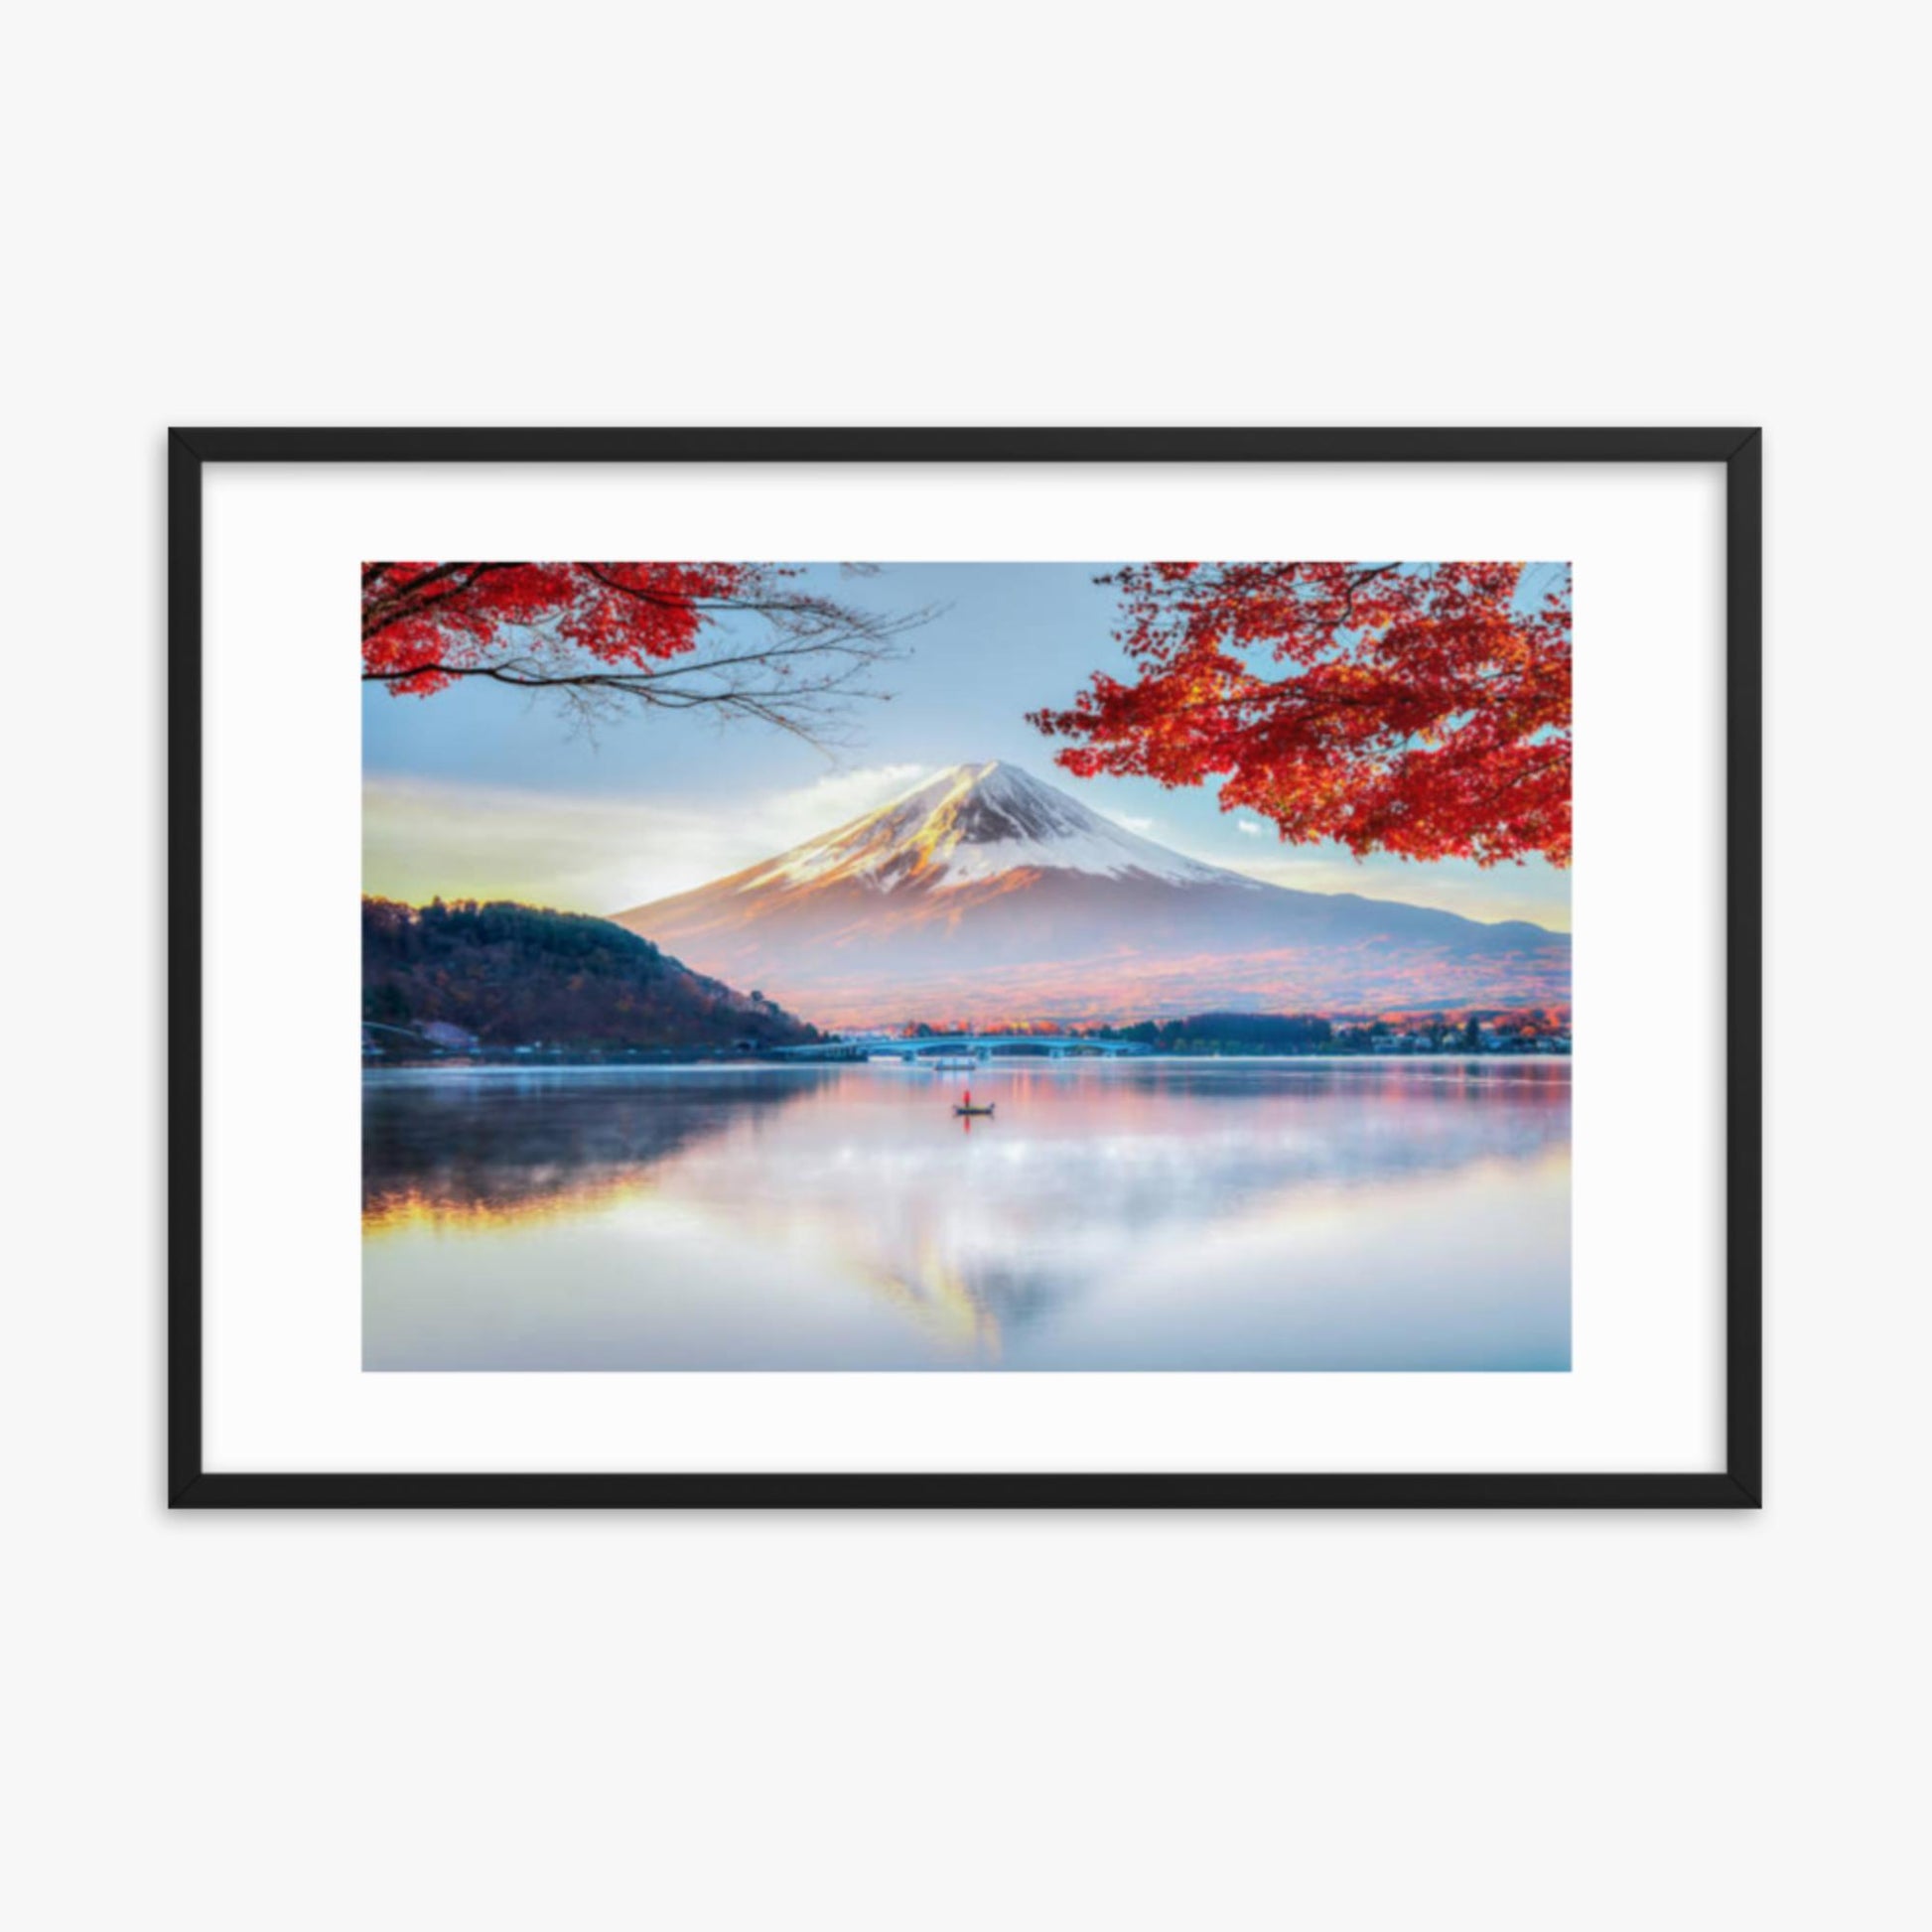 Fuji Mountain , Red Maple Tree and Fisherman Boat with Morning Mist in Autumn, Kawaguchiko Lake, Japan 24x36 in Poster With Black Frame